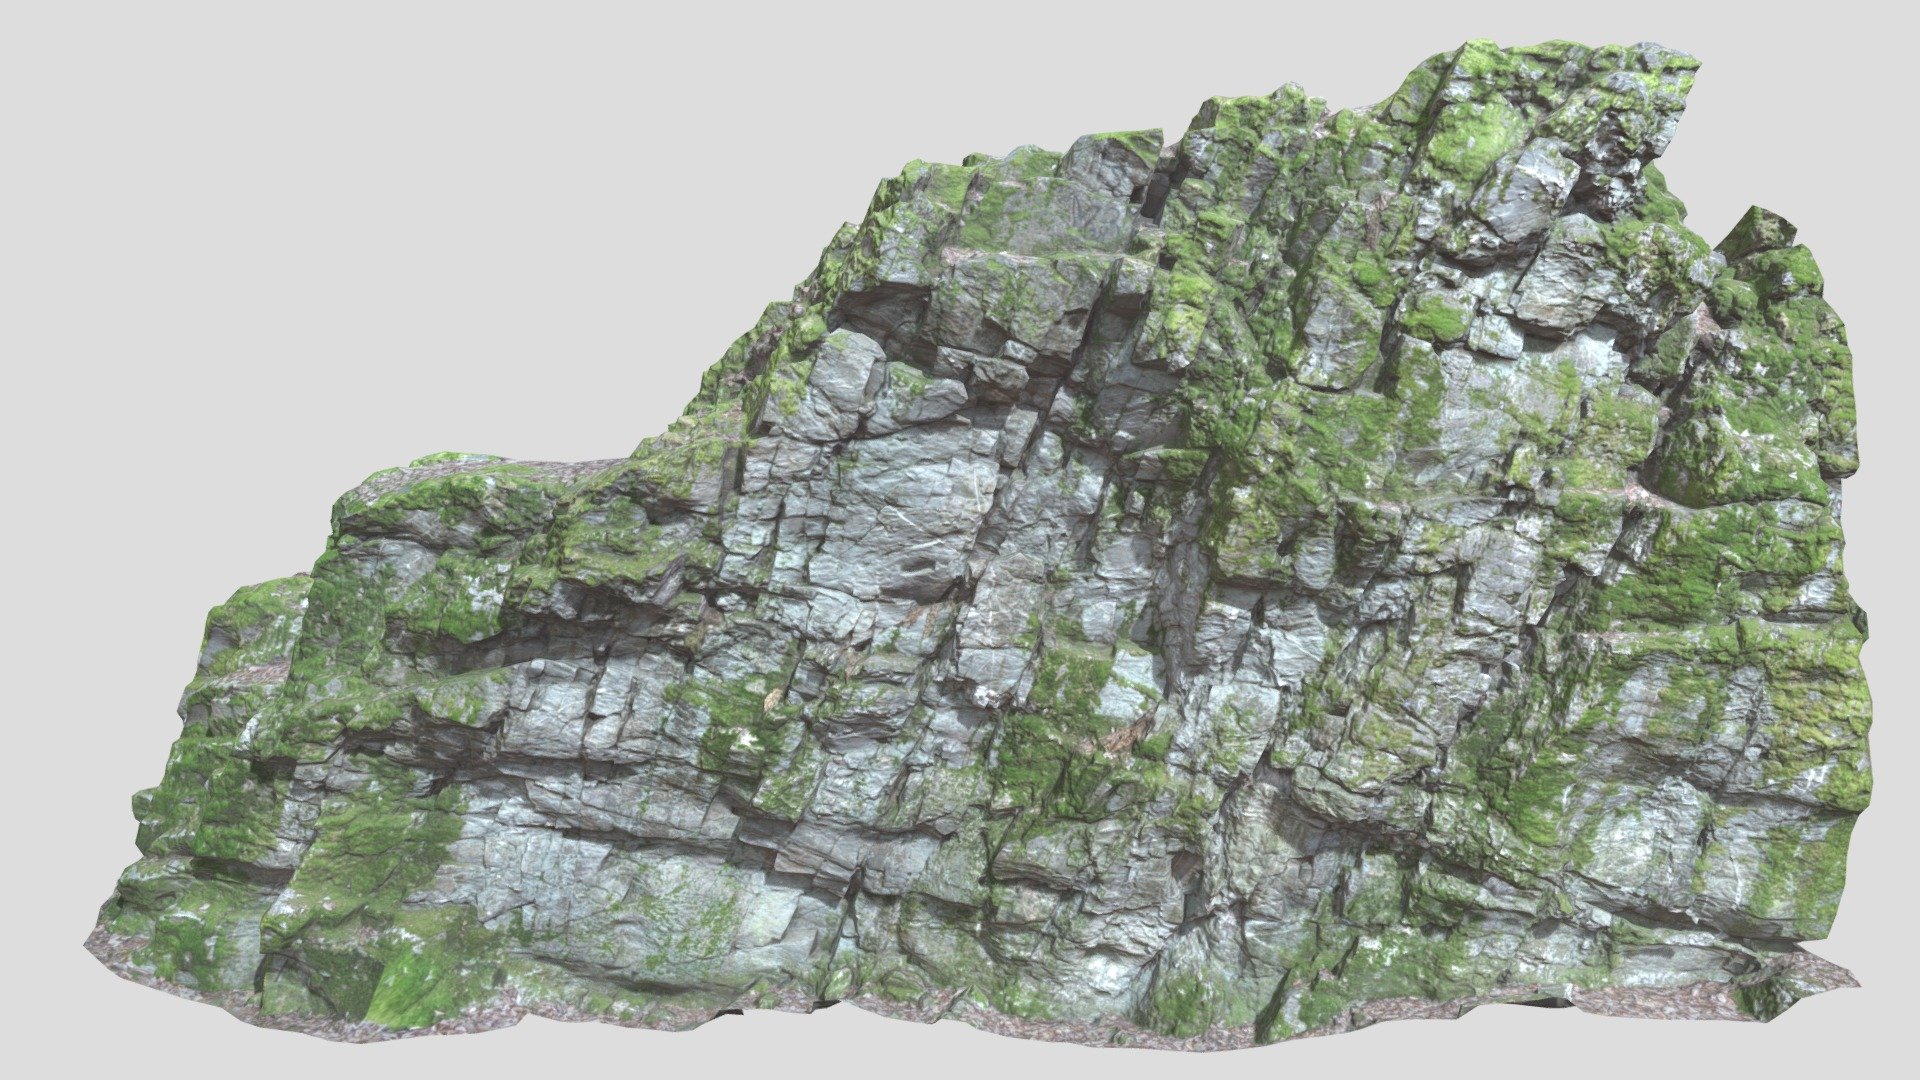 Fully processed 3D scans: reduced light information, color-matched, etc.

Ready to use for all kind of CGI 

Source Contains:





.blend




.obj




.fbx



8K Textures for each model:





normal




albedo




roughness



Please let me know if something isn’t working as it should.

Realistic Mossy Forest Cliff Rock Scan - Mossy Forest Cliff Rock Scan - Buy Royalty Free 3D model by Per's Scan Collection (@perz_scans) 3d model